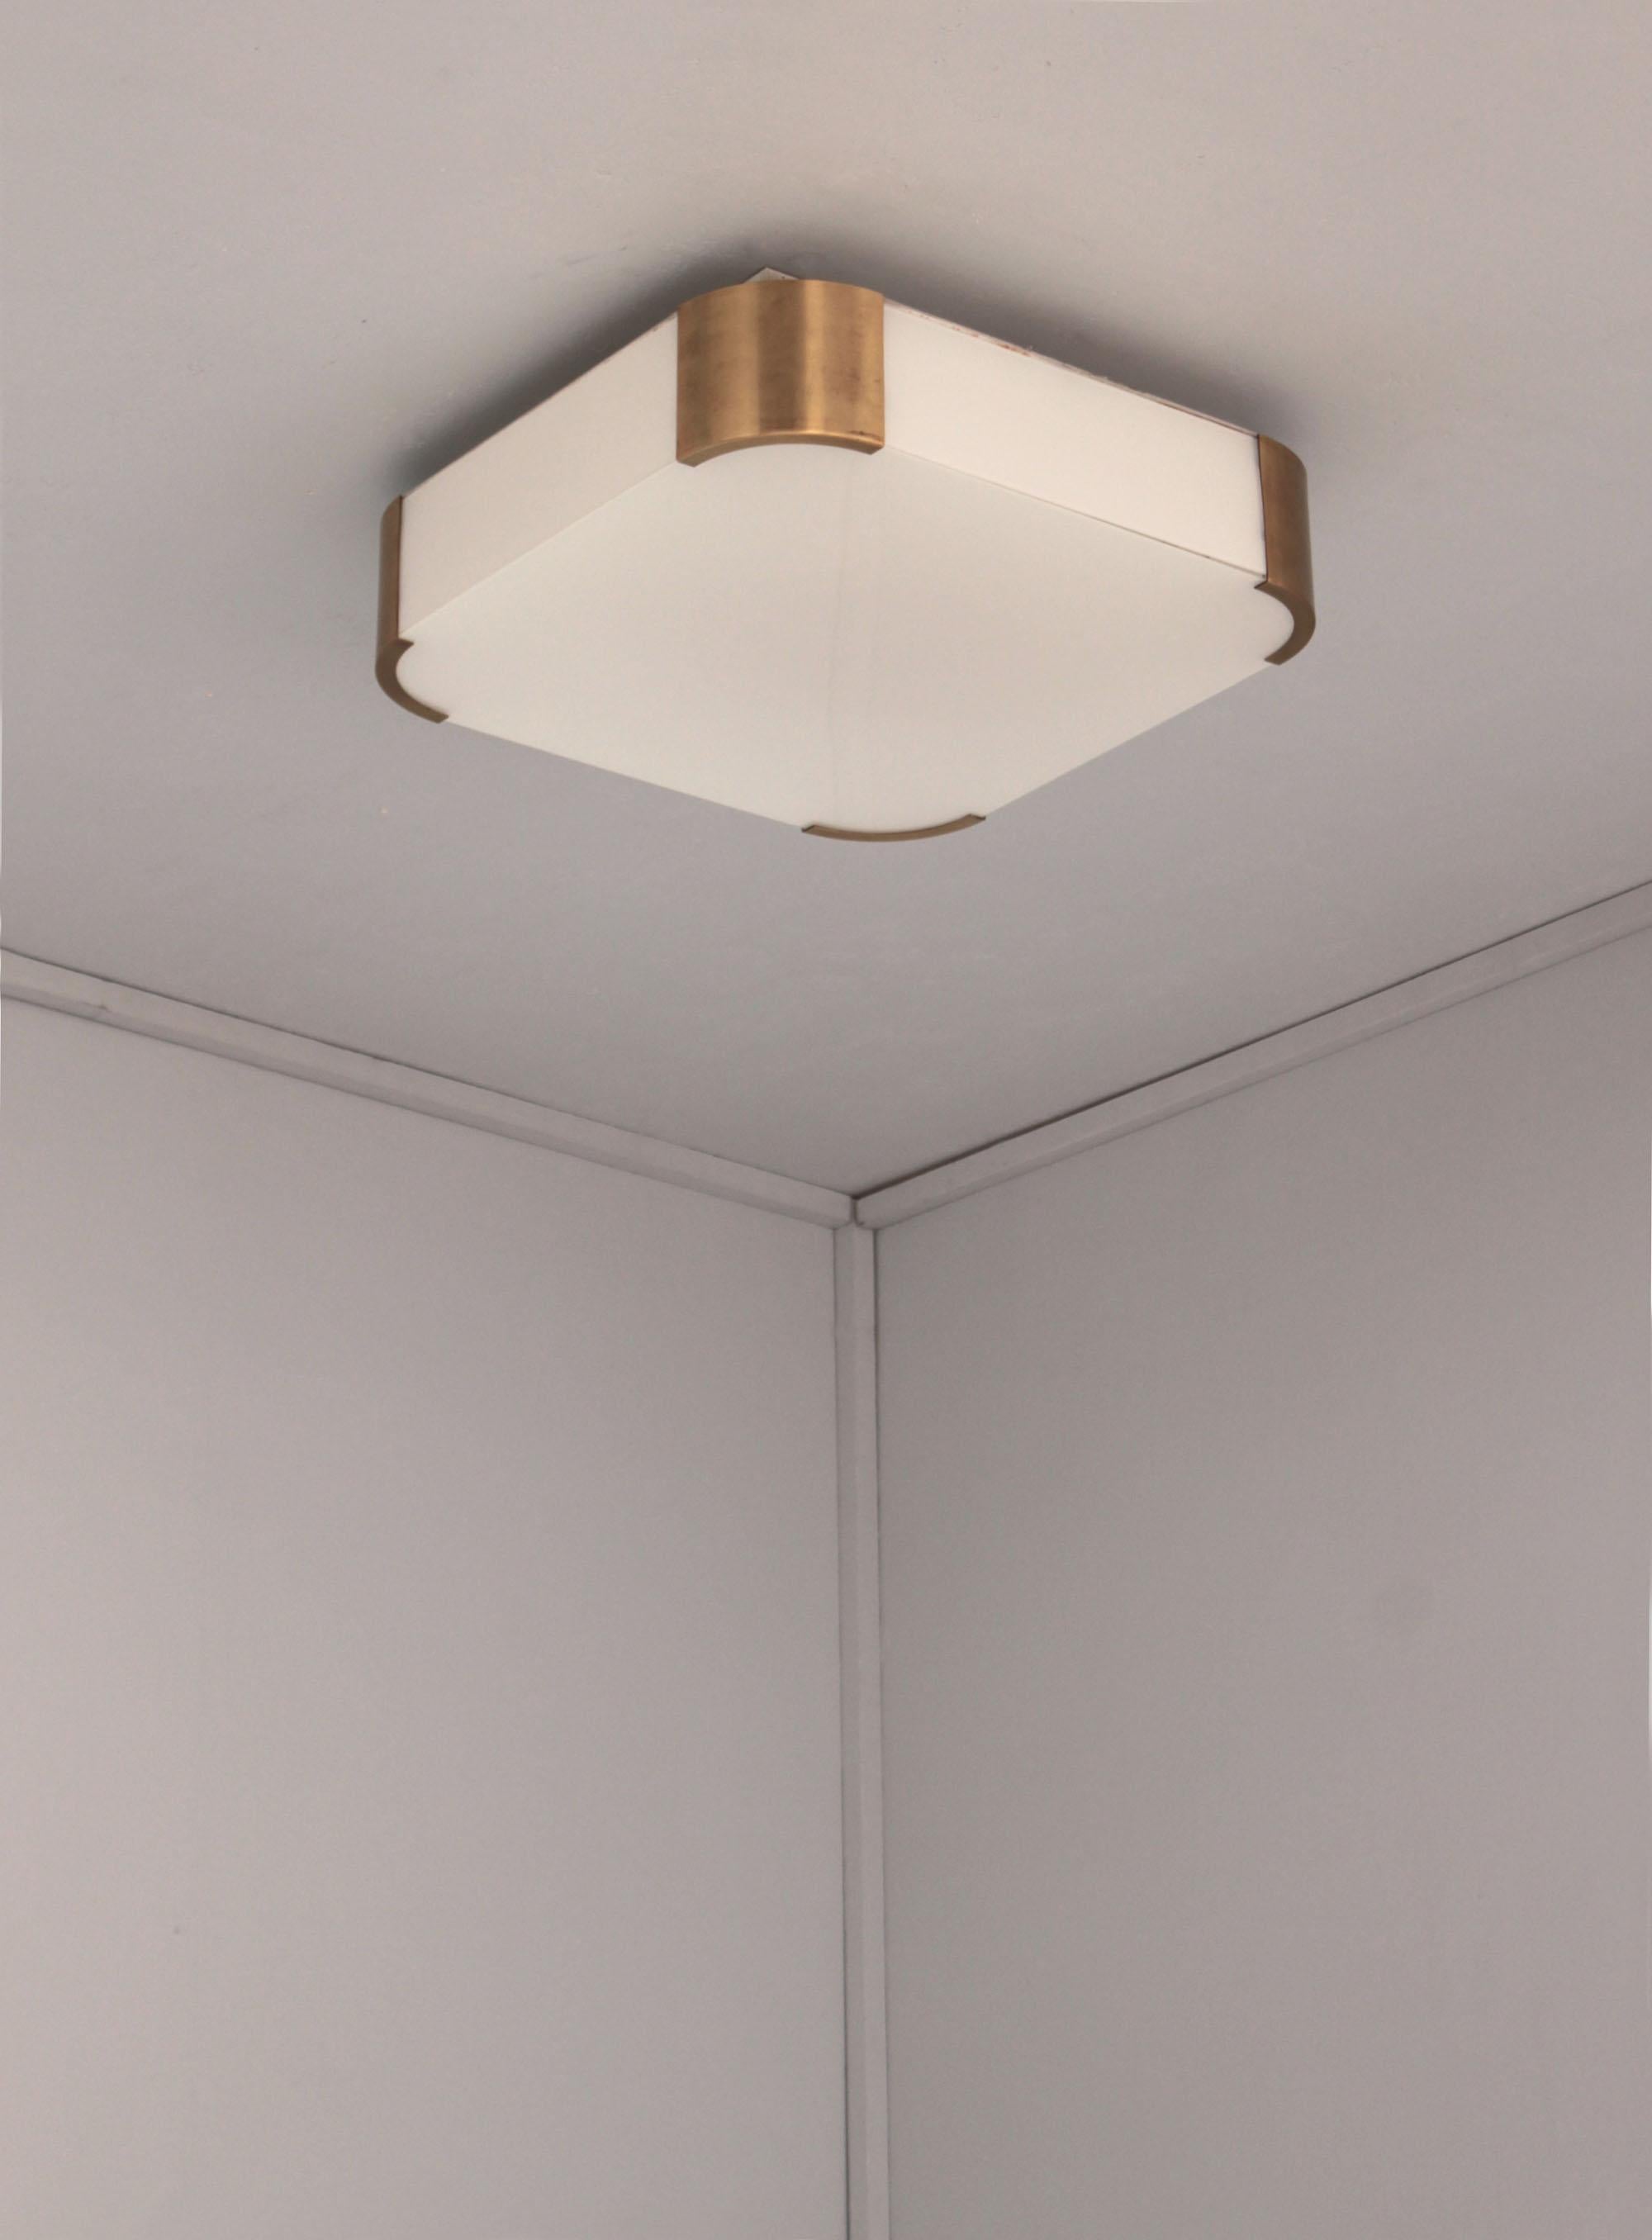 Atelier Perzel - A fine French Art Deco enameled glass and gilded bronze square ceiling or wall light with rounded corners.